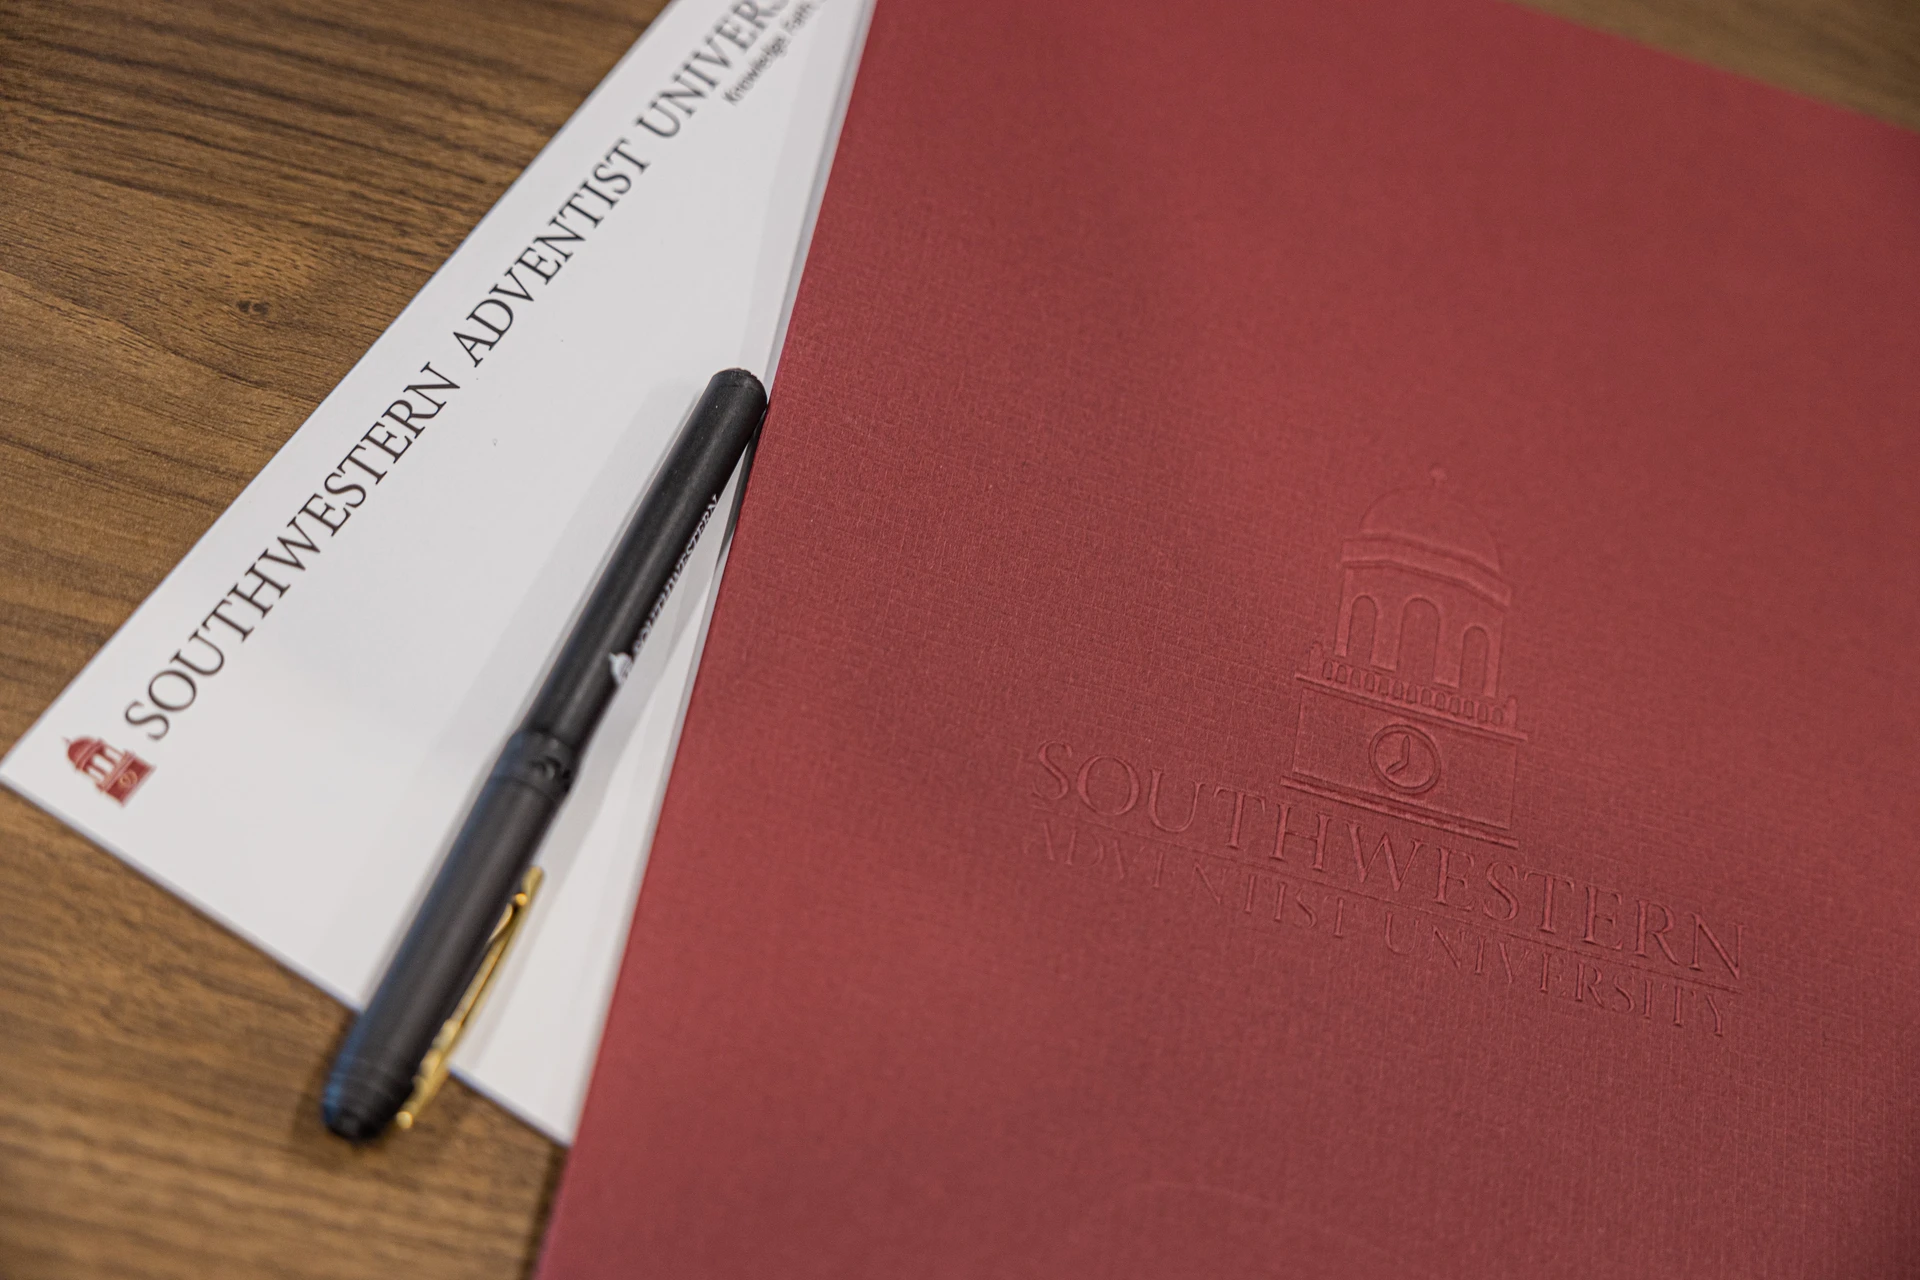 SWAU branded forms and folder